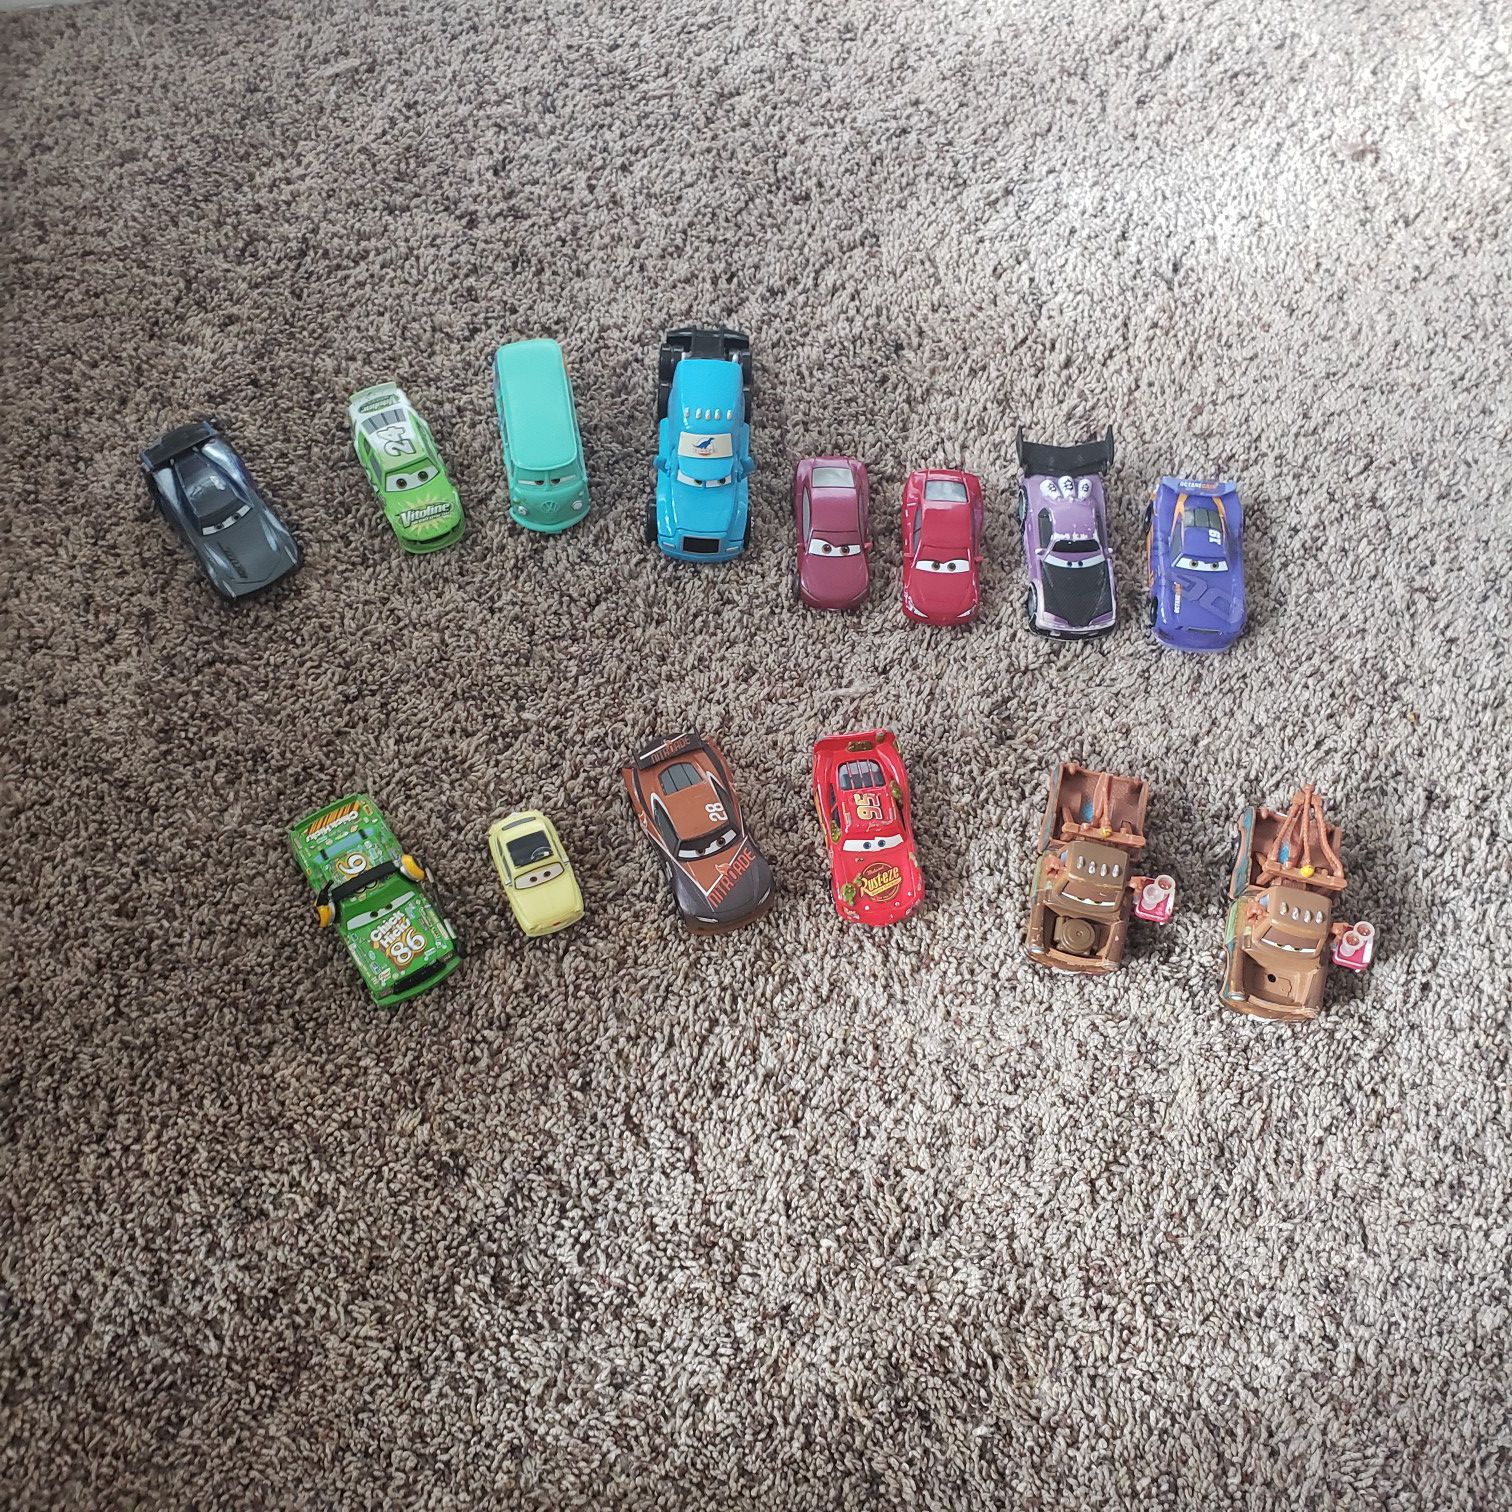 Cars from the movie